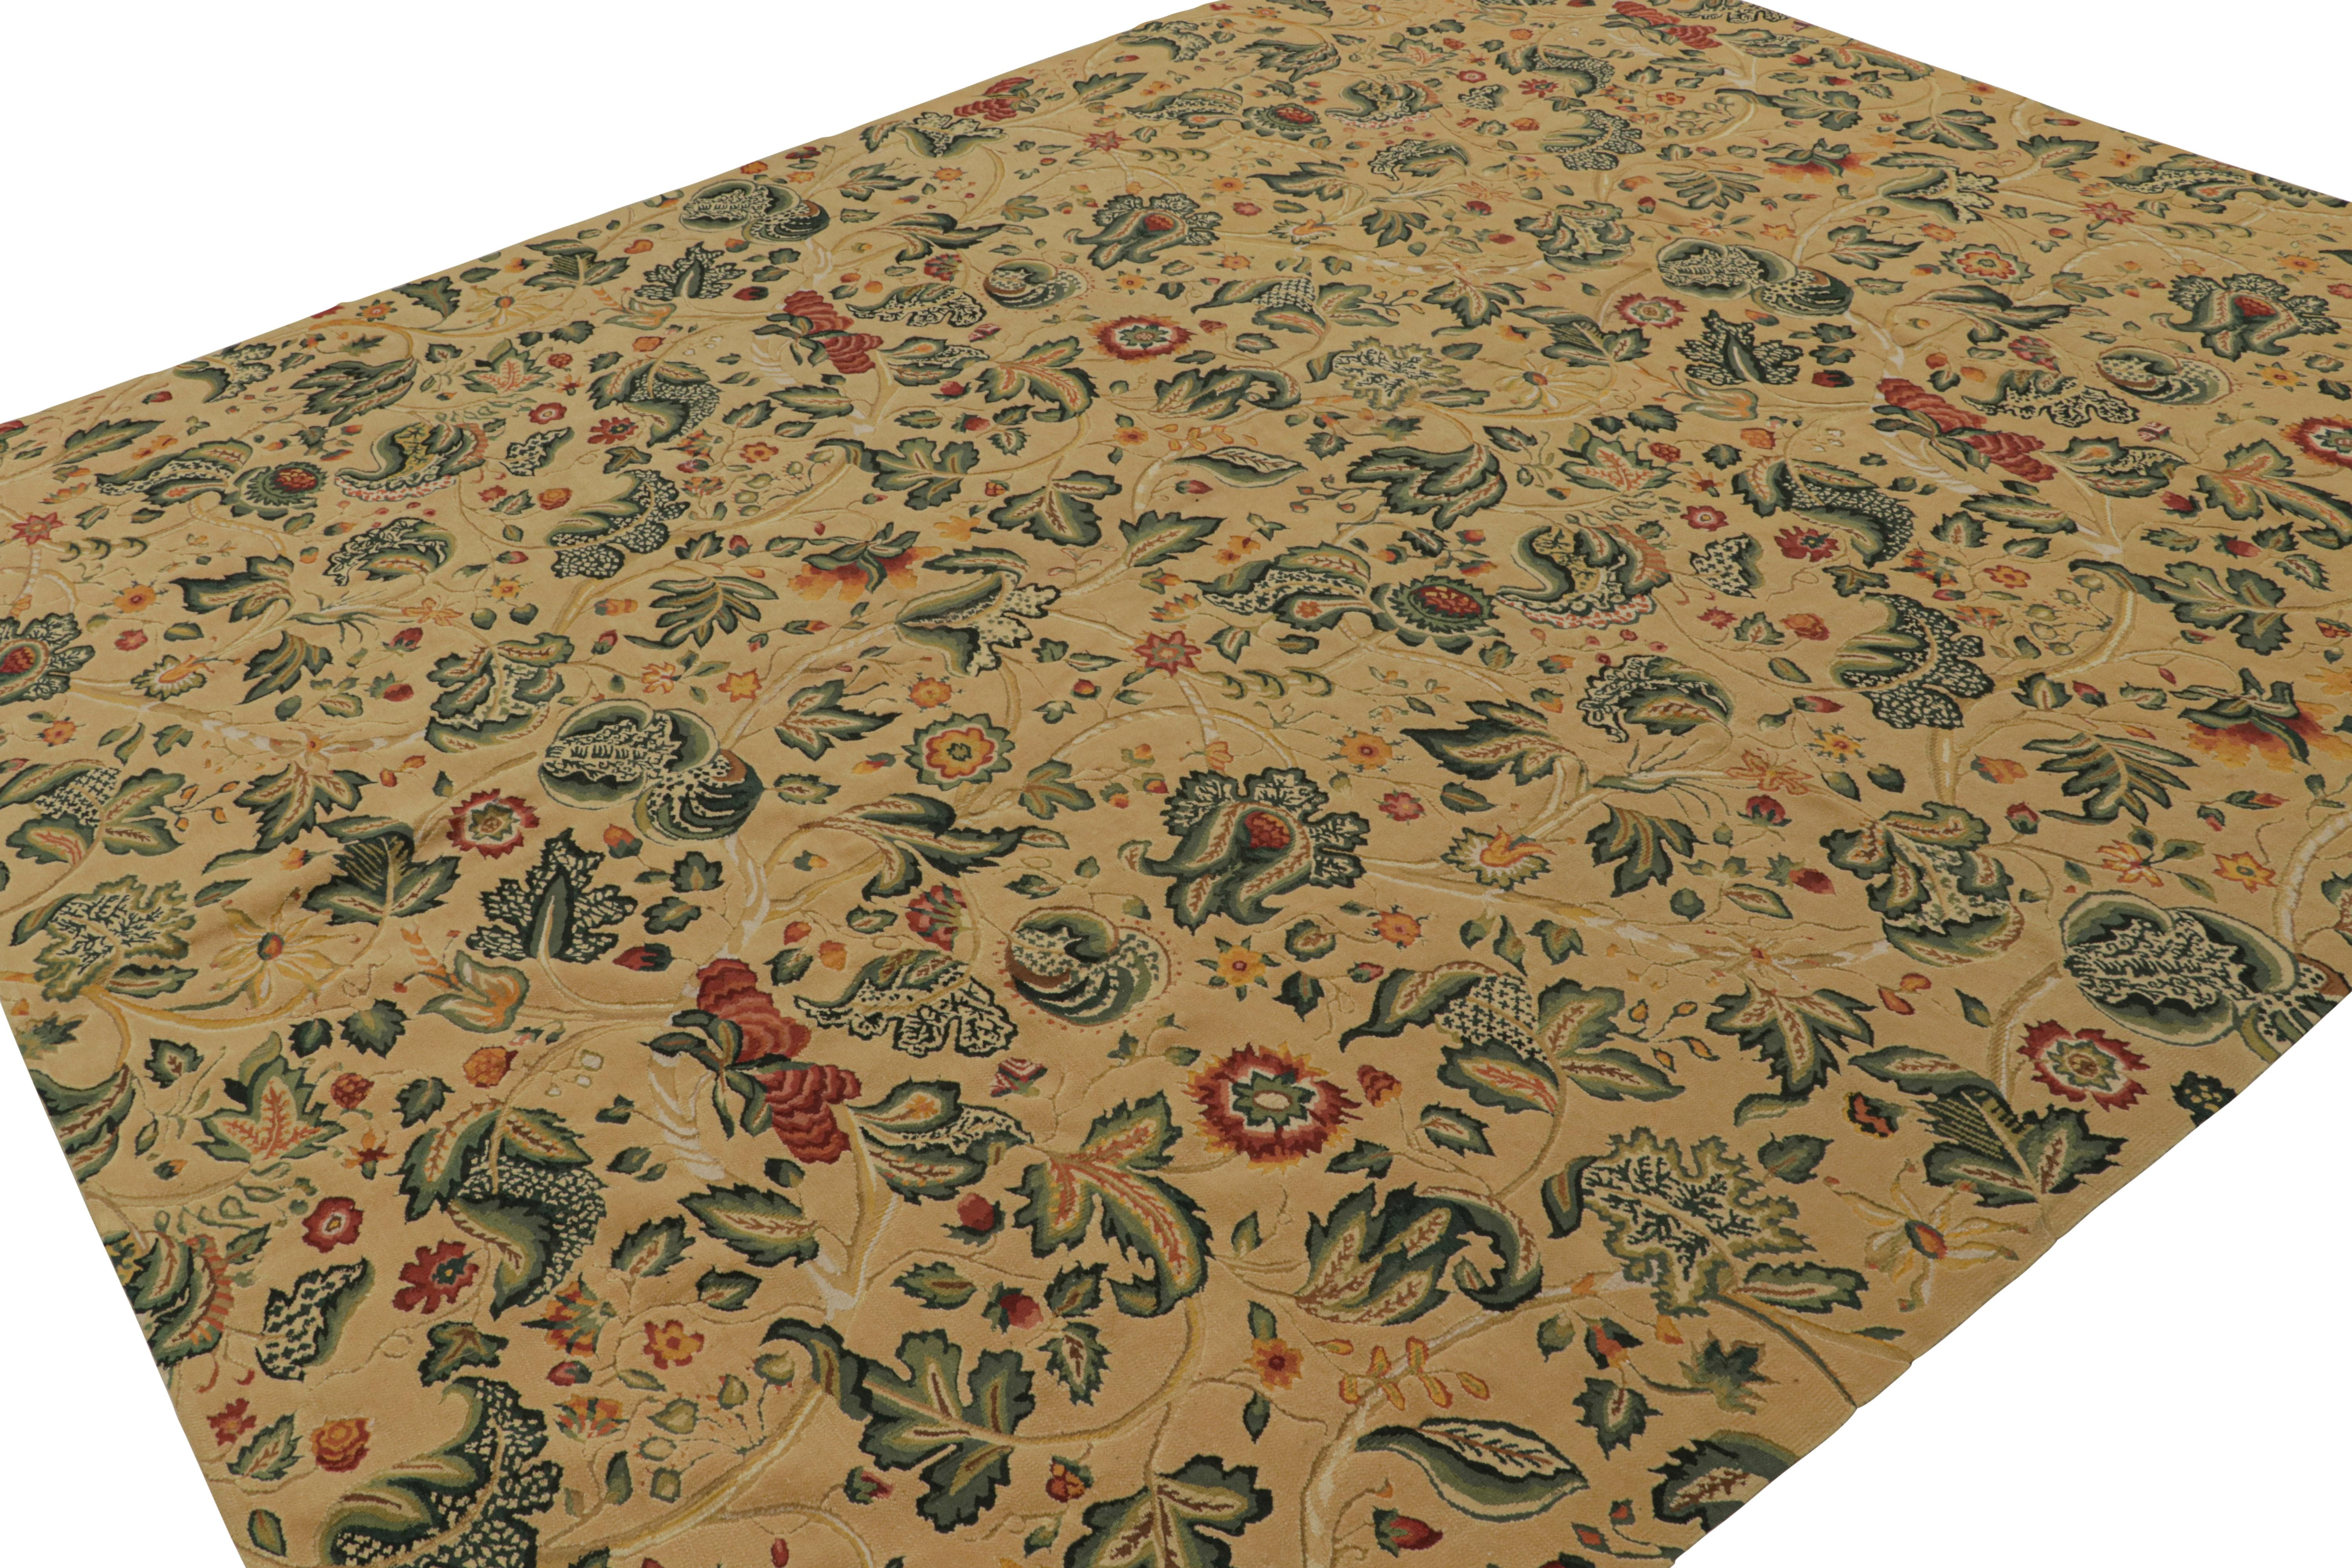 Handwoven in wool, this 10x11 European flatweave rug has been inspired by 18th century English Tudor rugs and tapestries. The design features floral patterns in green, red, gold and teal accents across the field. 

On the design: 

Keen eyes will